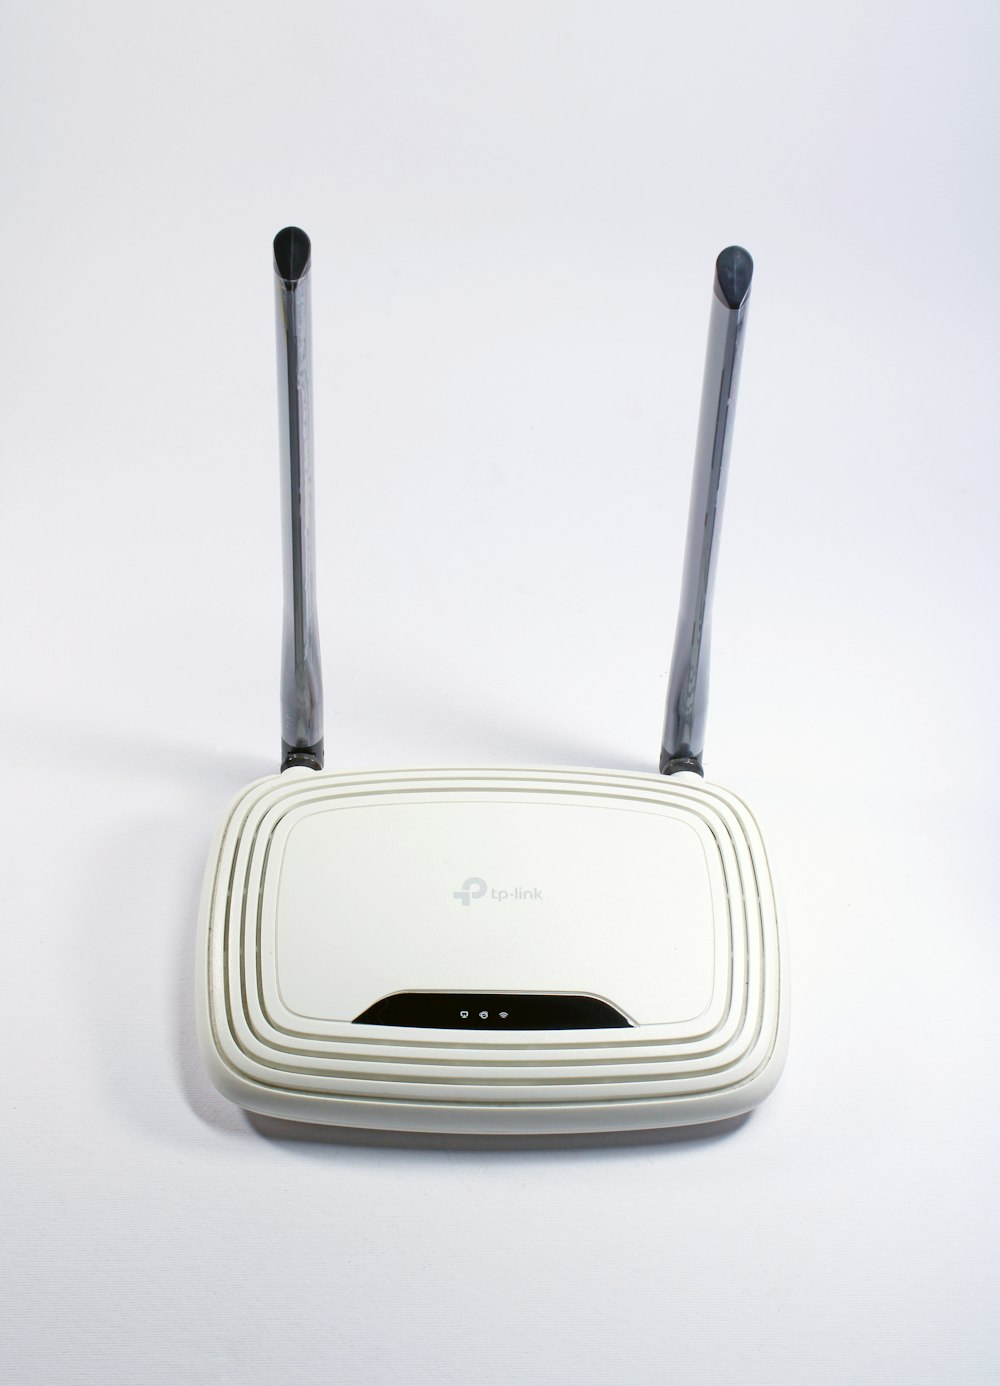 white and black tp link wireless router